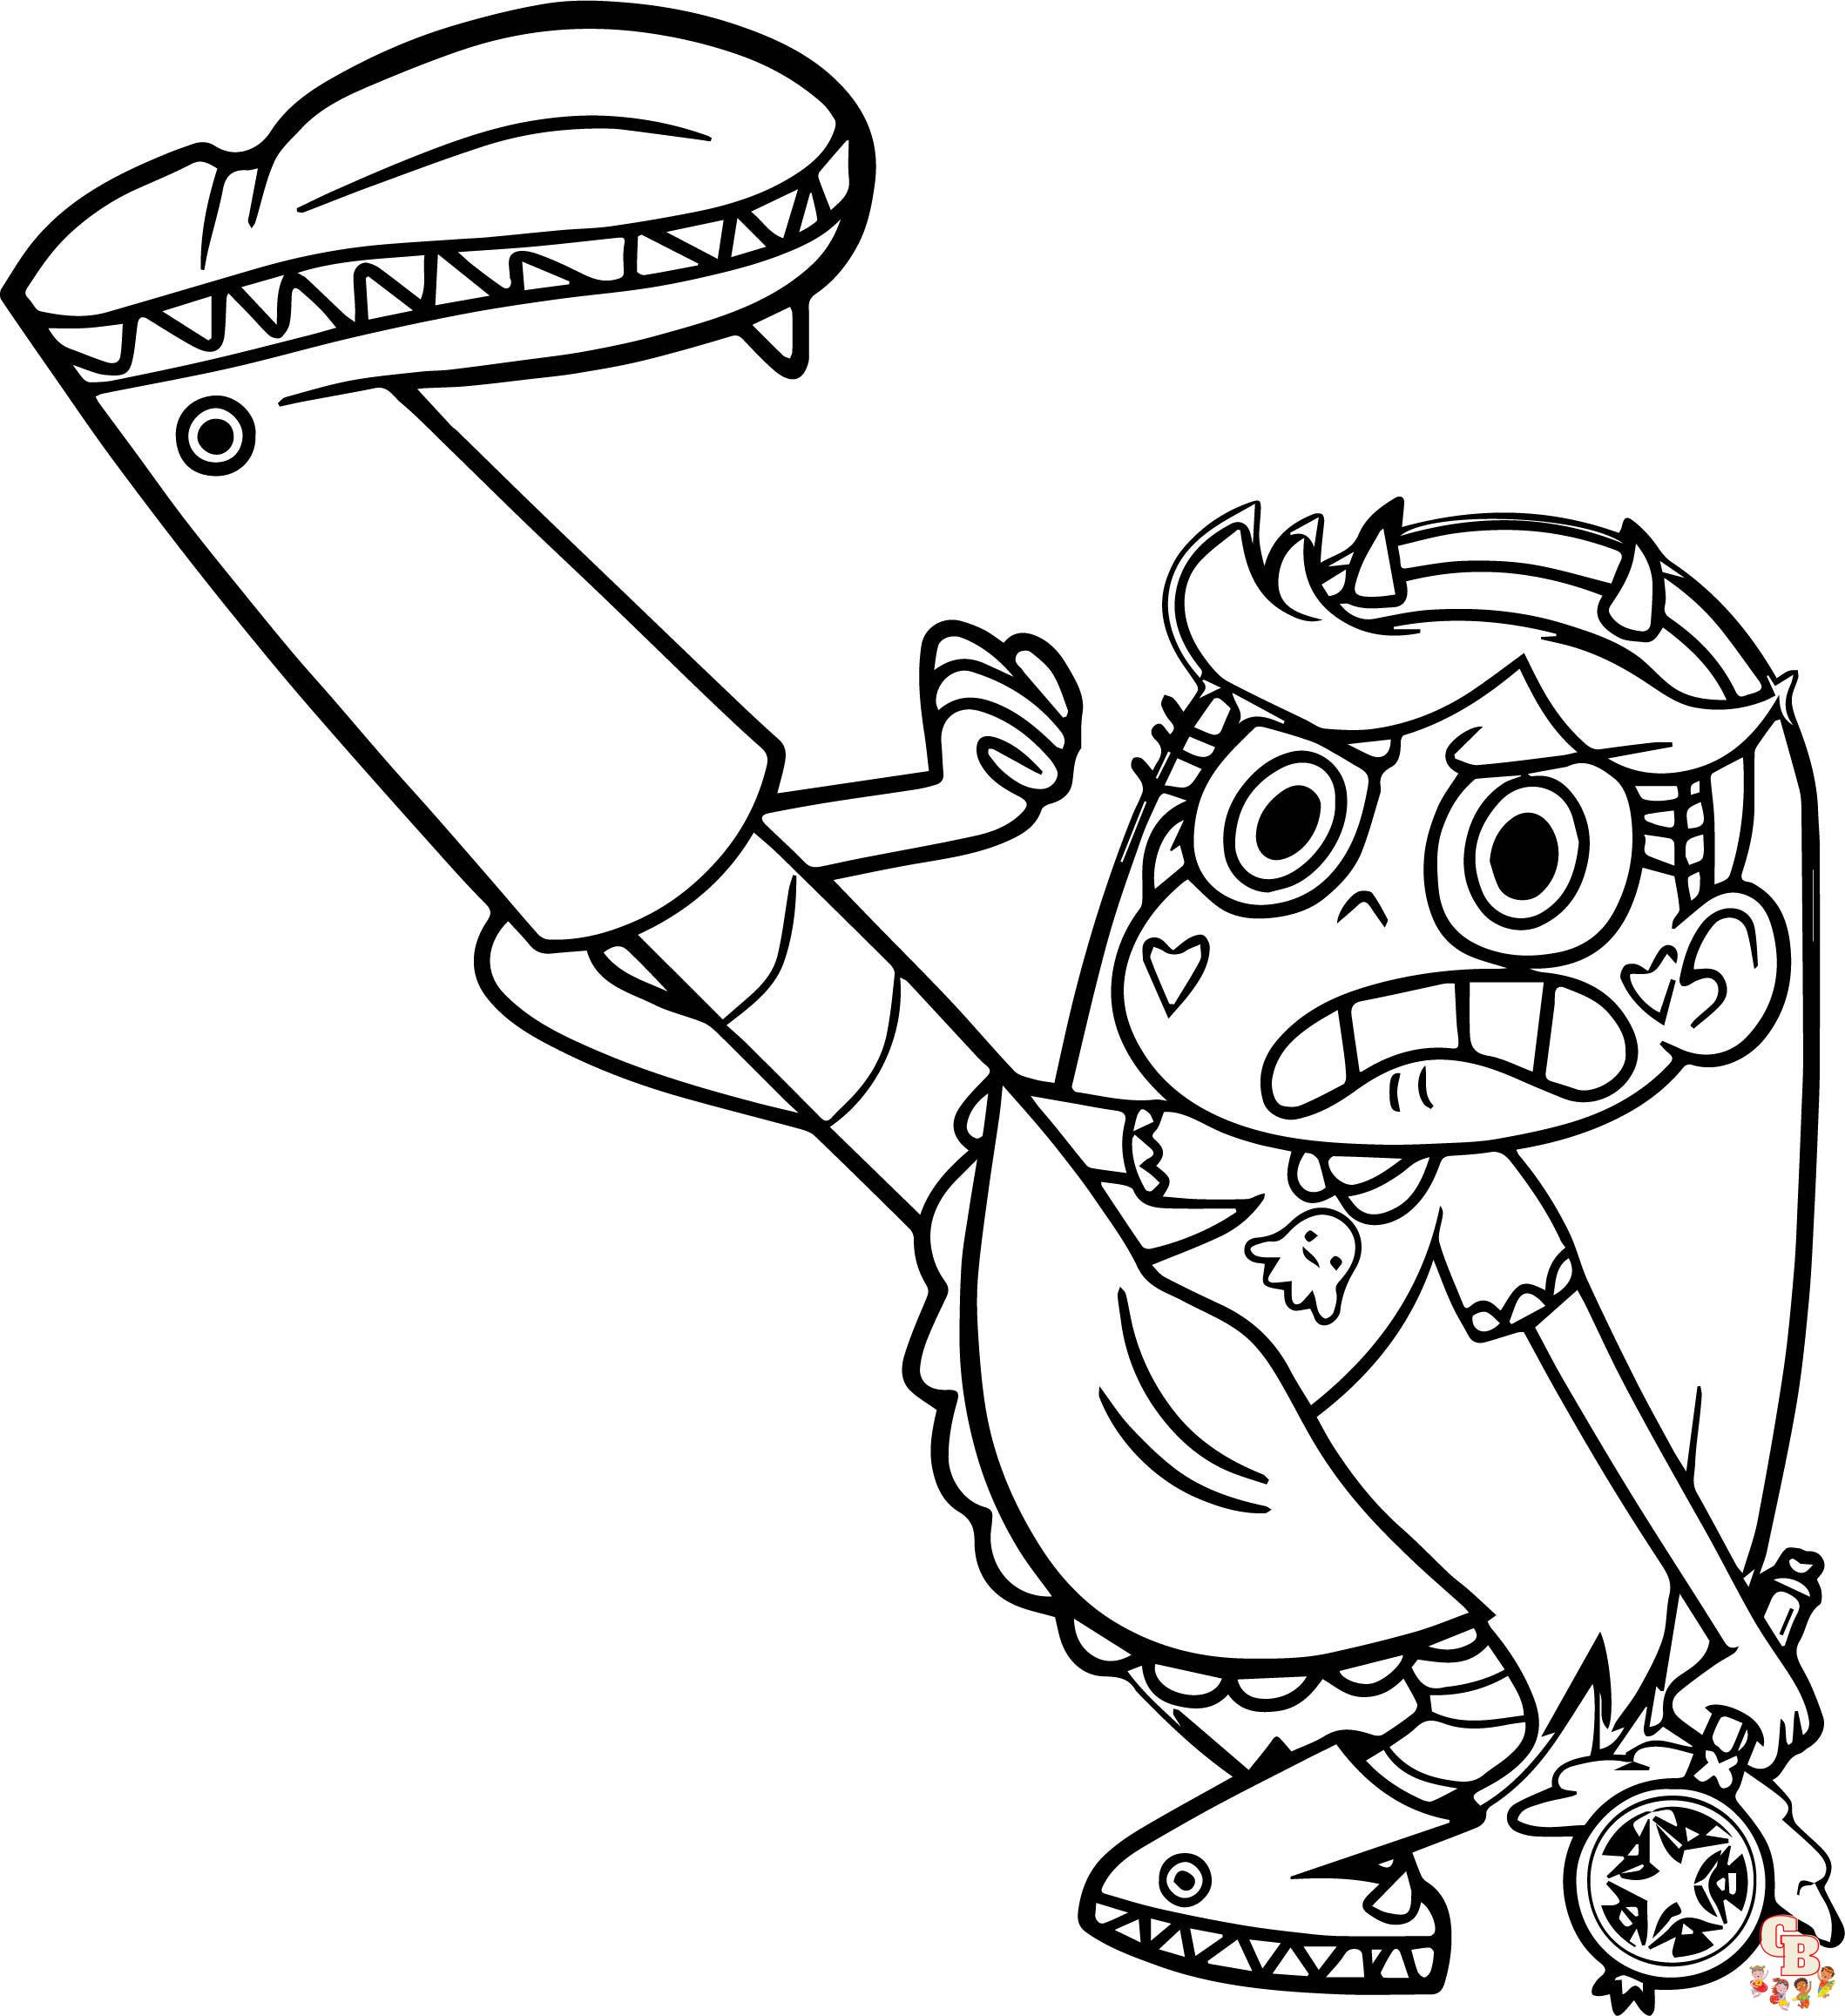 Find the Best Star Butterfly Coloring Pages - Free and Printable